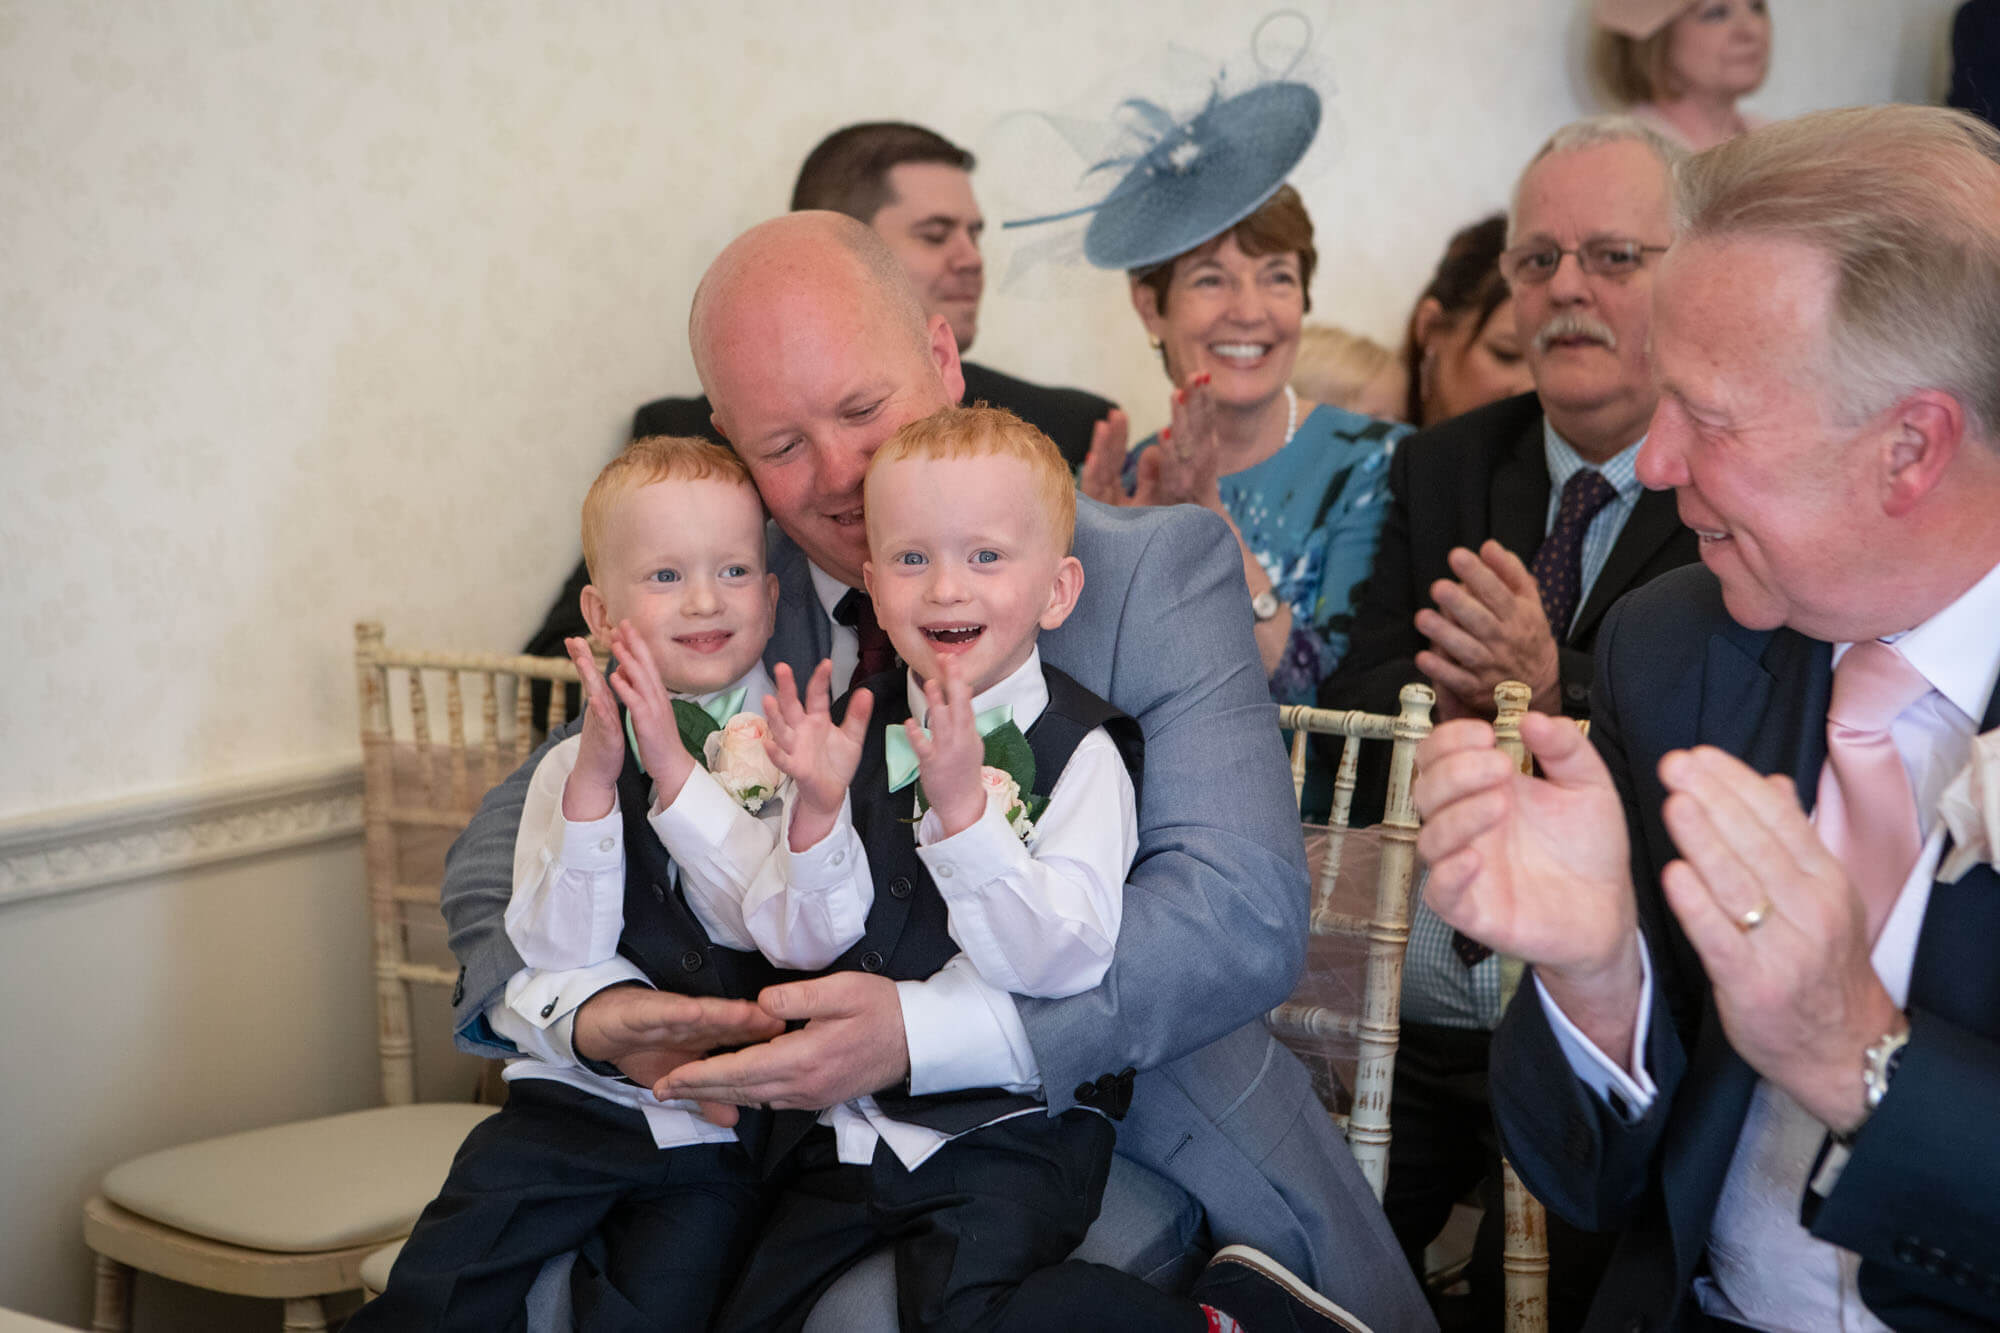 Twin page boys laugh and clap as they sit on their father's knee after the couple kiss